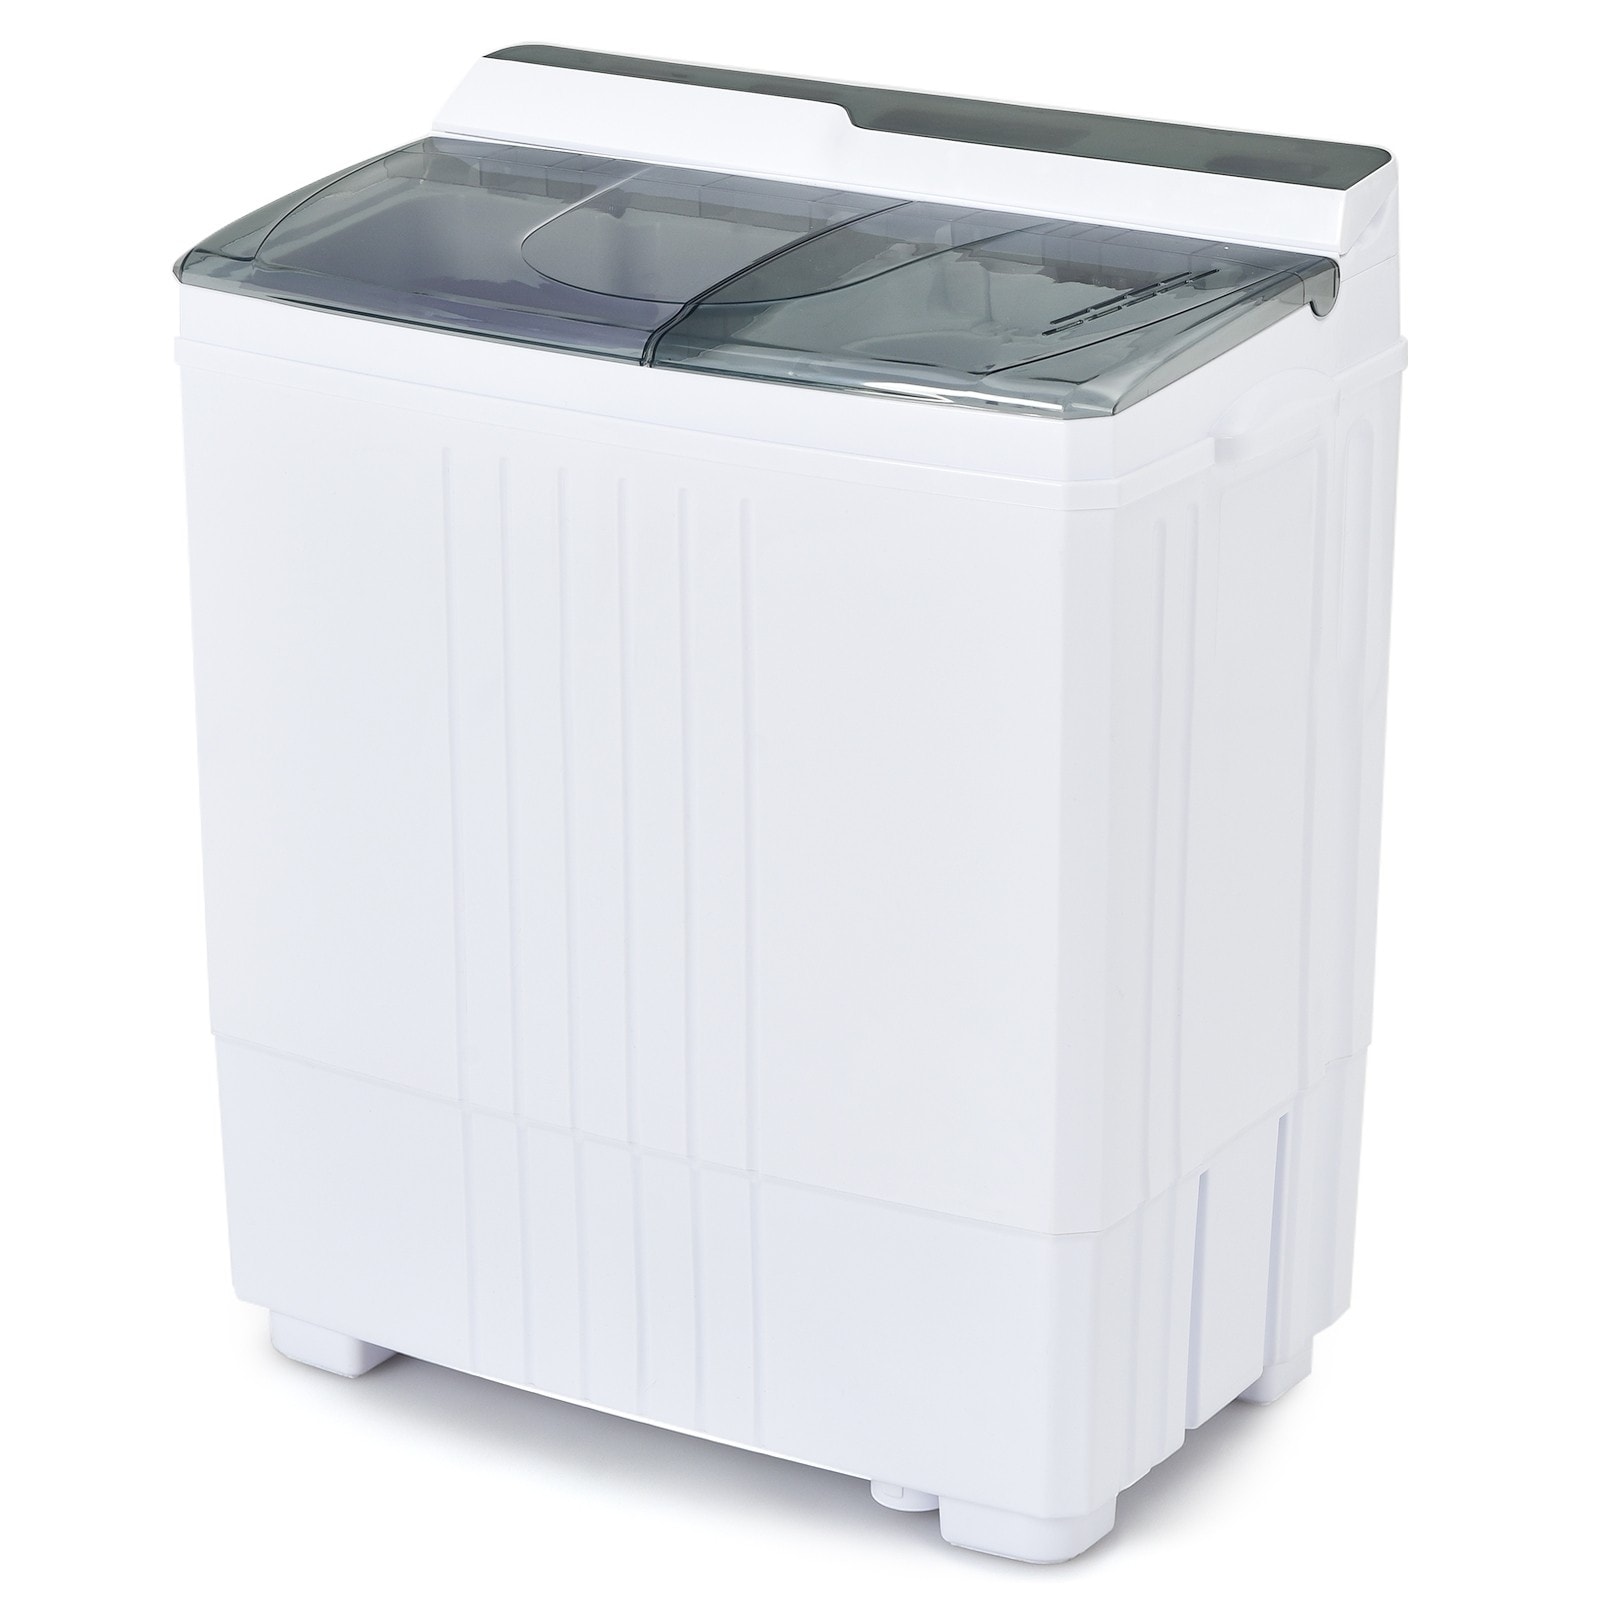 COSTWAY Portable Washing Machine, Twin Tub 26 Lbs Capacity, 18 Lbs Washer  and 8 Lbs Spinner, Compact Washer with Control Knobs, Timer Function, Drain